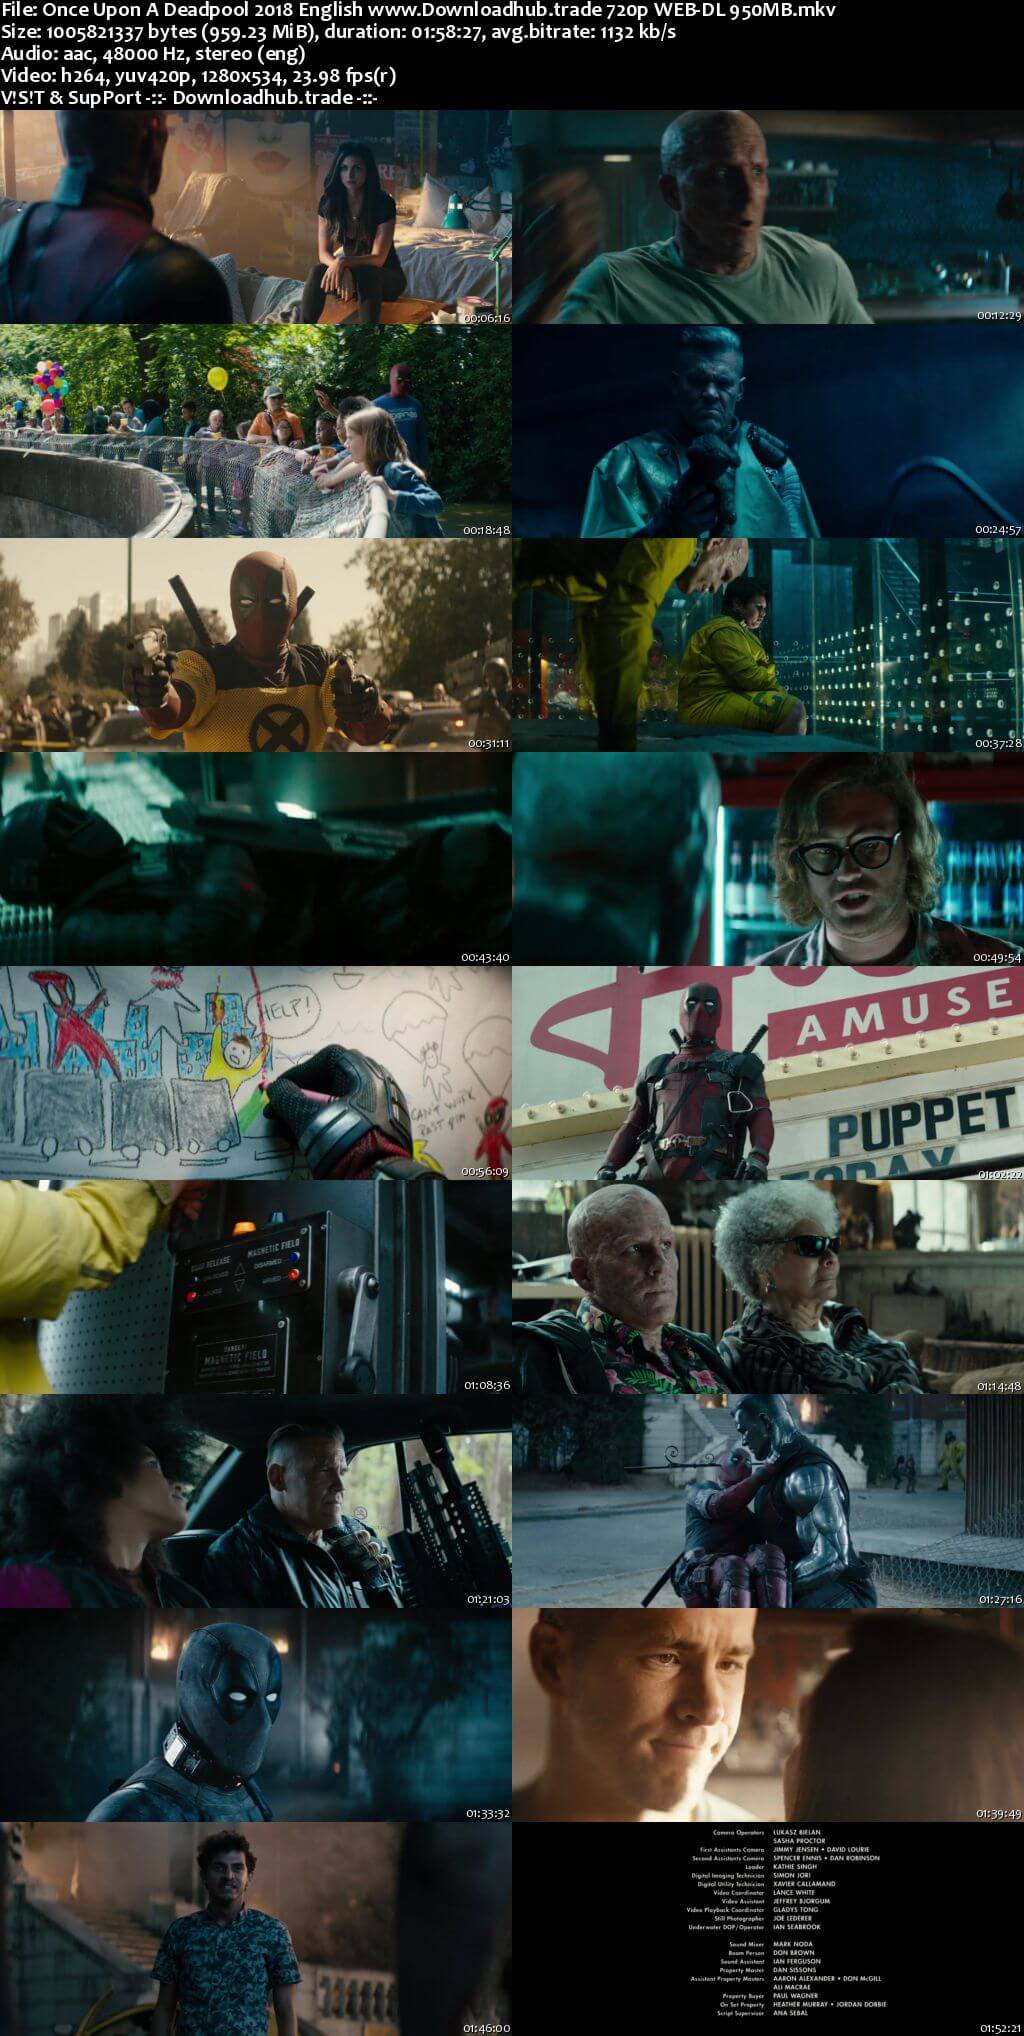 Once Upon A Deadpool 2018 English 720p Web-DL 950MB